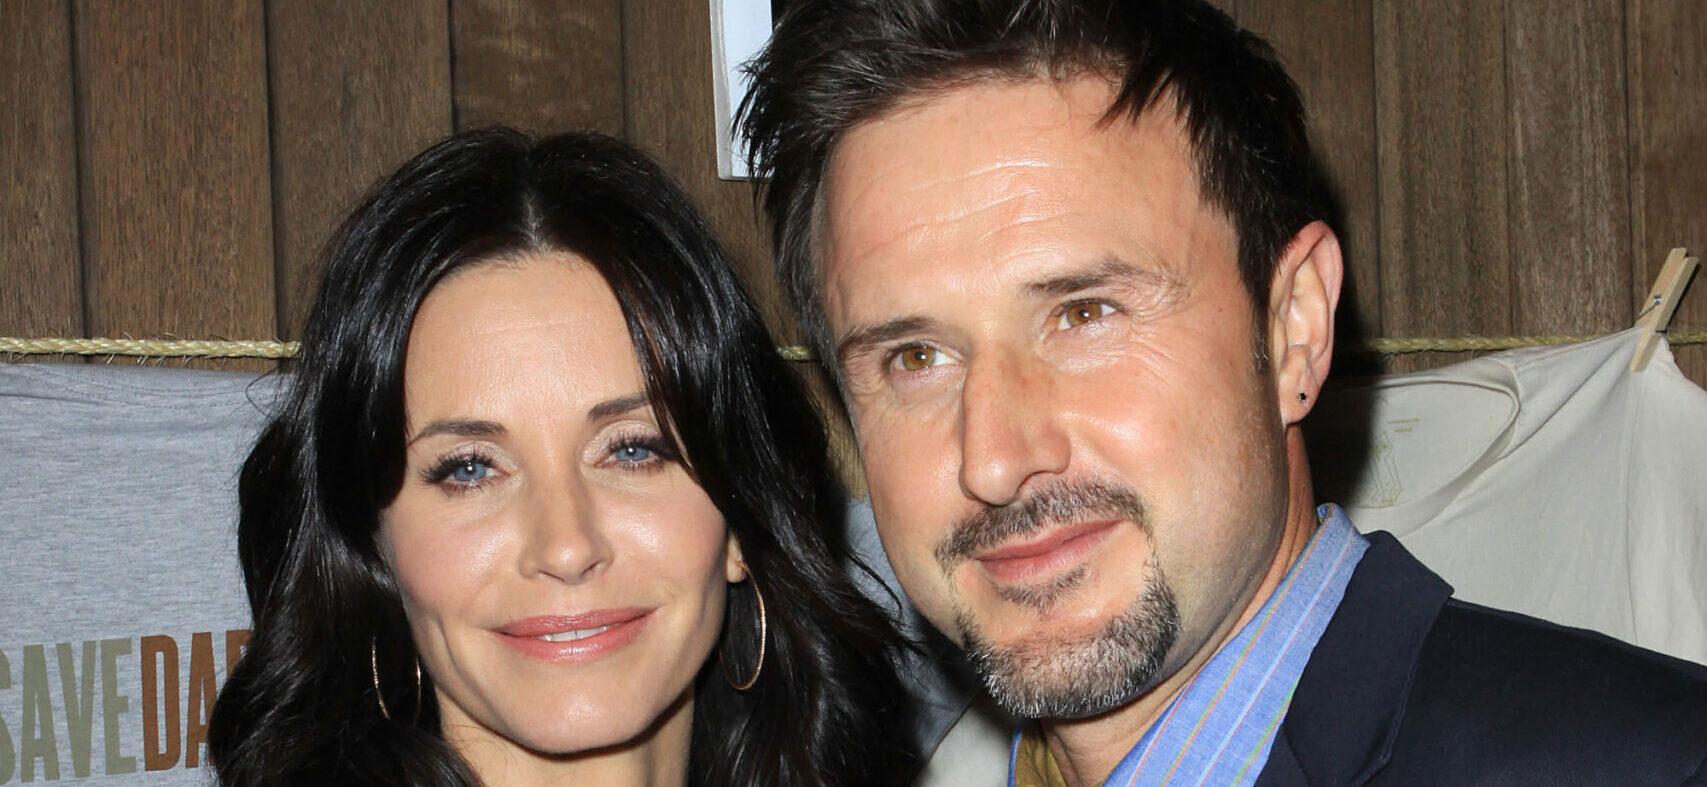 David Arquette Reveals He Felt Intimidated By Ex-Wife Courteney Cox’s Fame And Success